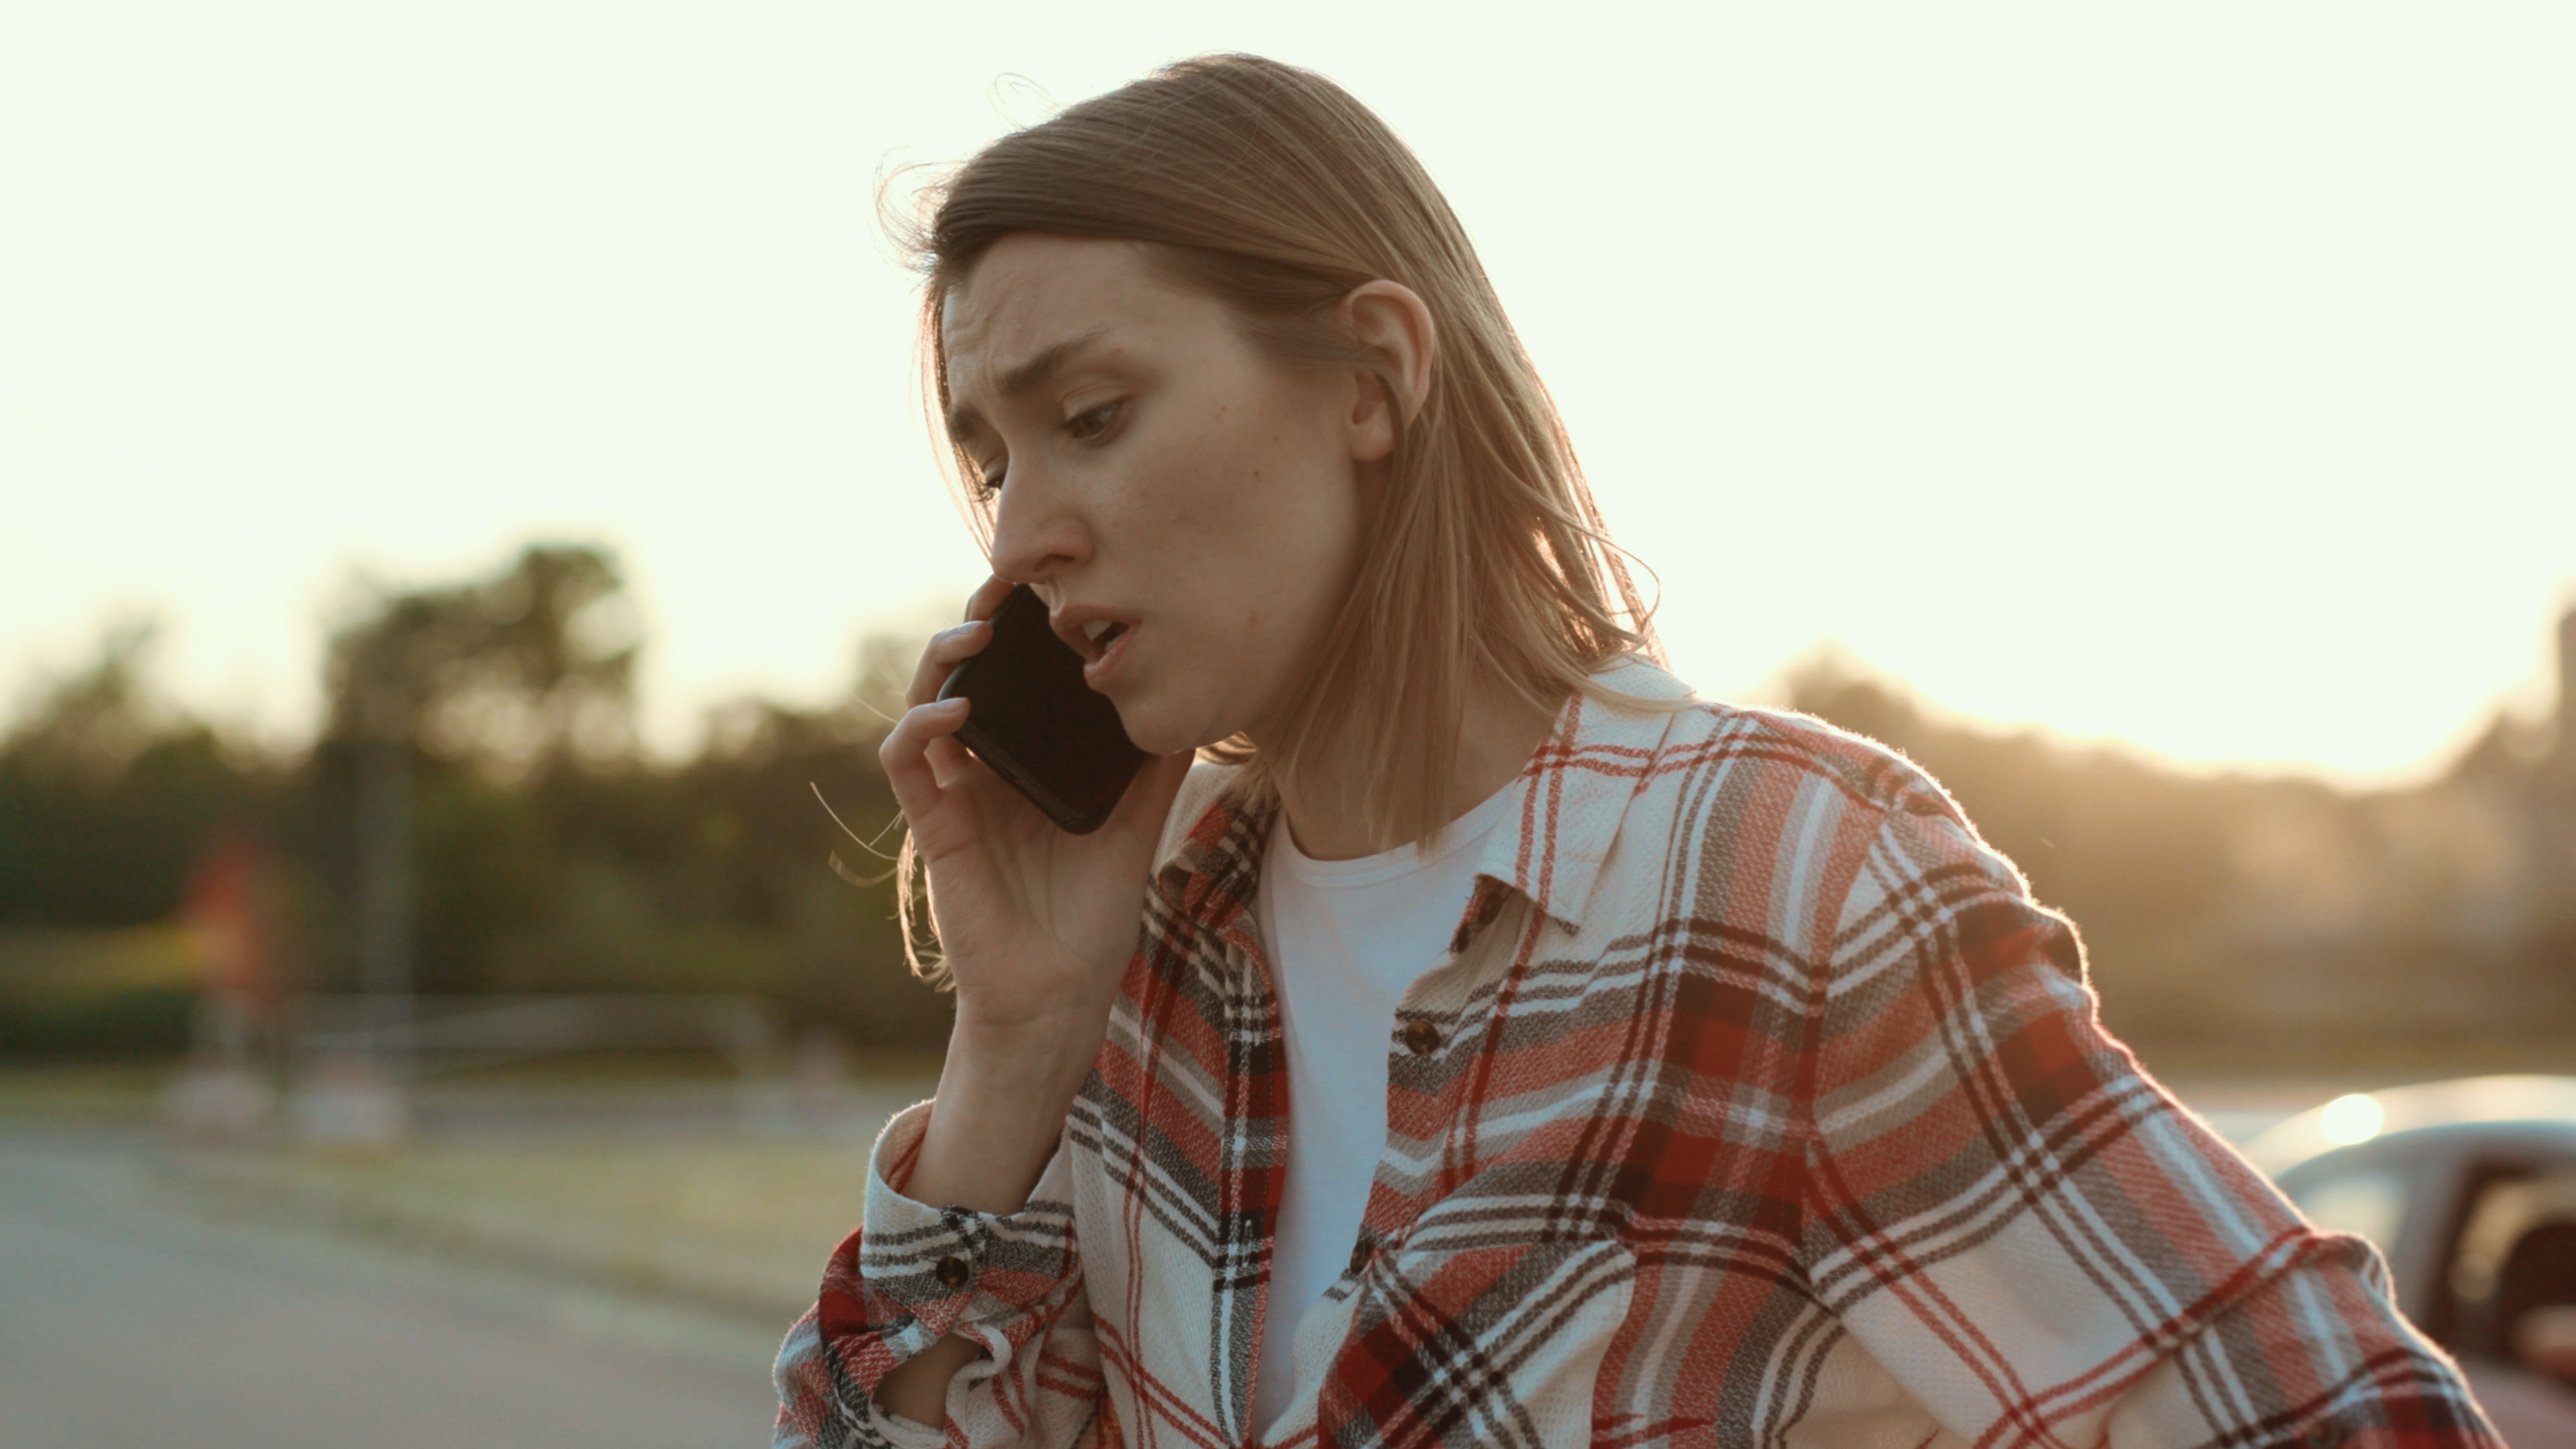 A woman on the phone looking worried | Shutterstock